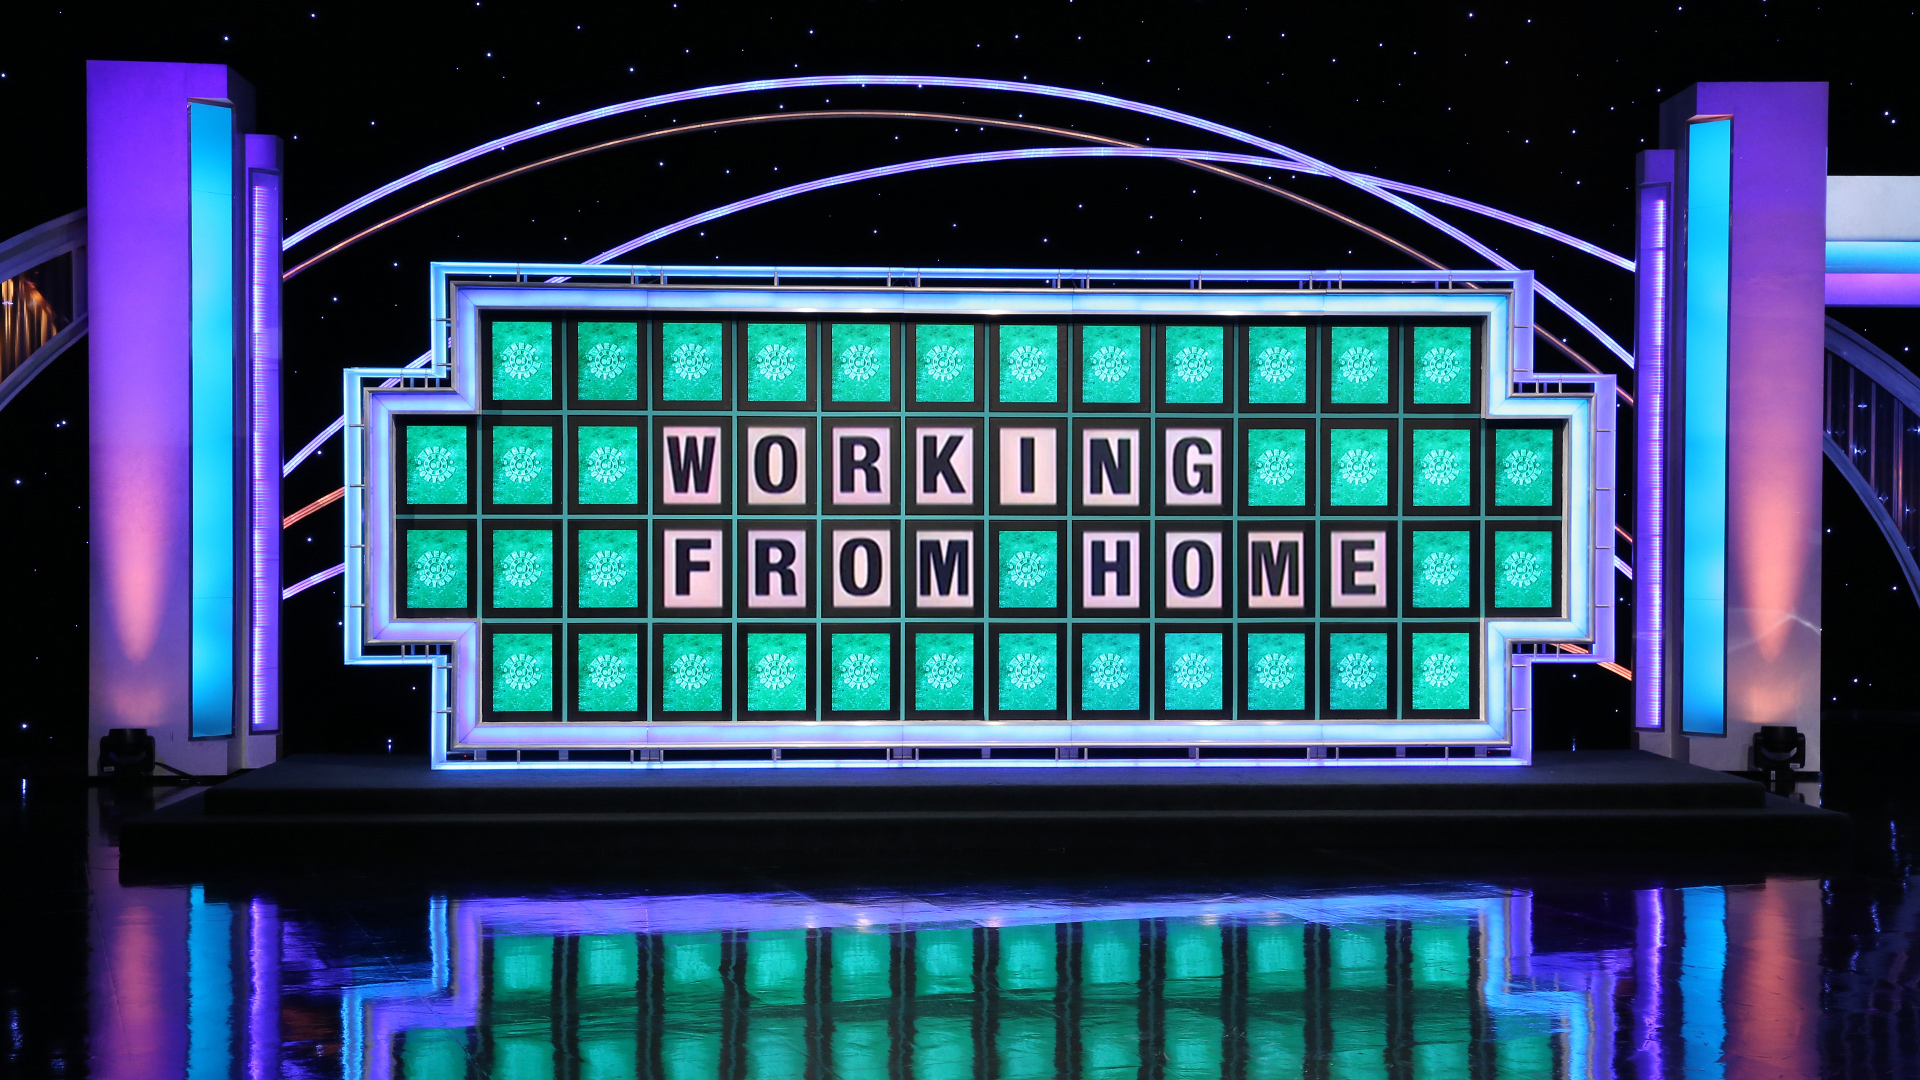 Wheel of Fortune puzzle board. Virtual background to use on Zoom, Microsoft Teams, Skype, Google Meet, WebEx or any other compatible app.